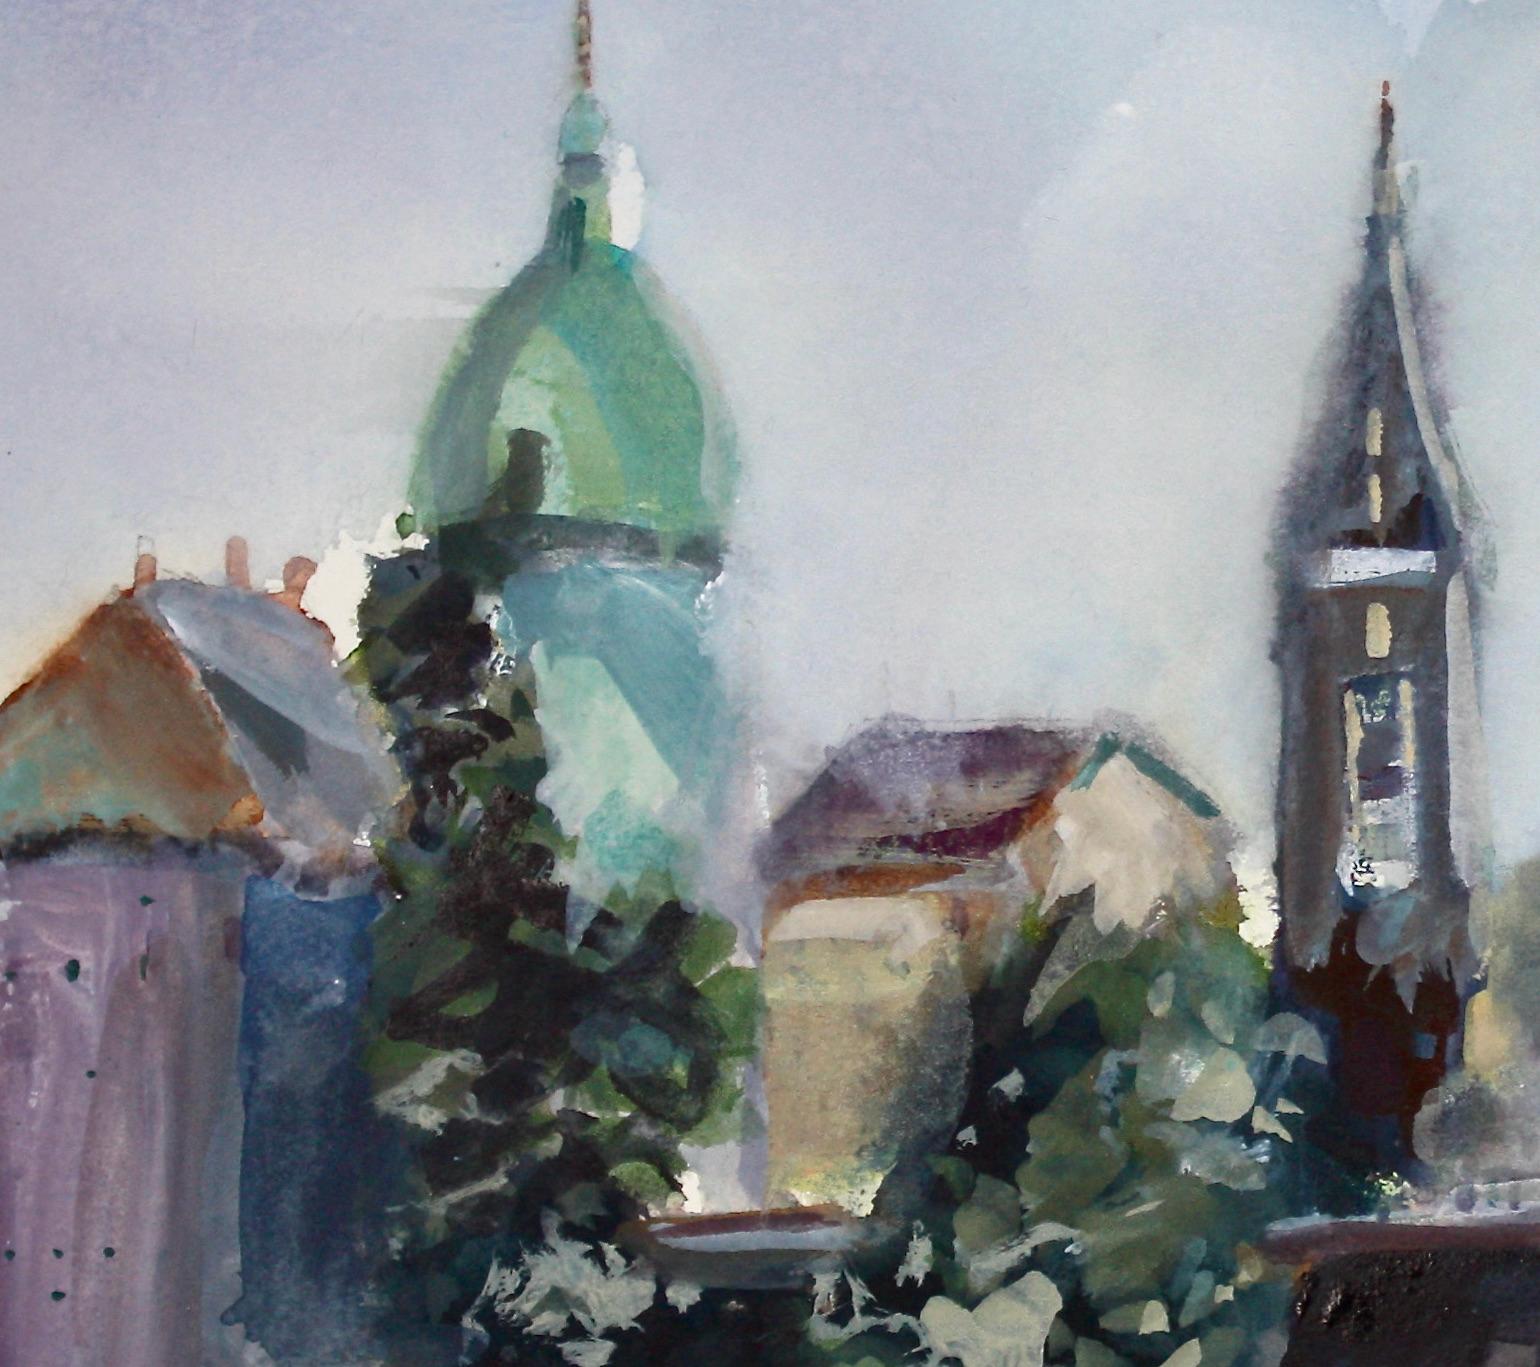 <p>Artist Comments<br>Artist Joe Giuffrida paints a scenic view of Charles Bridge extending the Vltava River. The bridge's archways provide the energy or sense of movement versus the still shapes of the city buildings. Joe decides to go with a